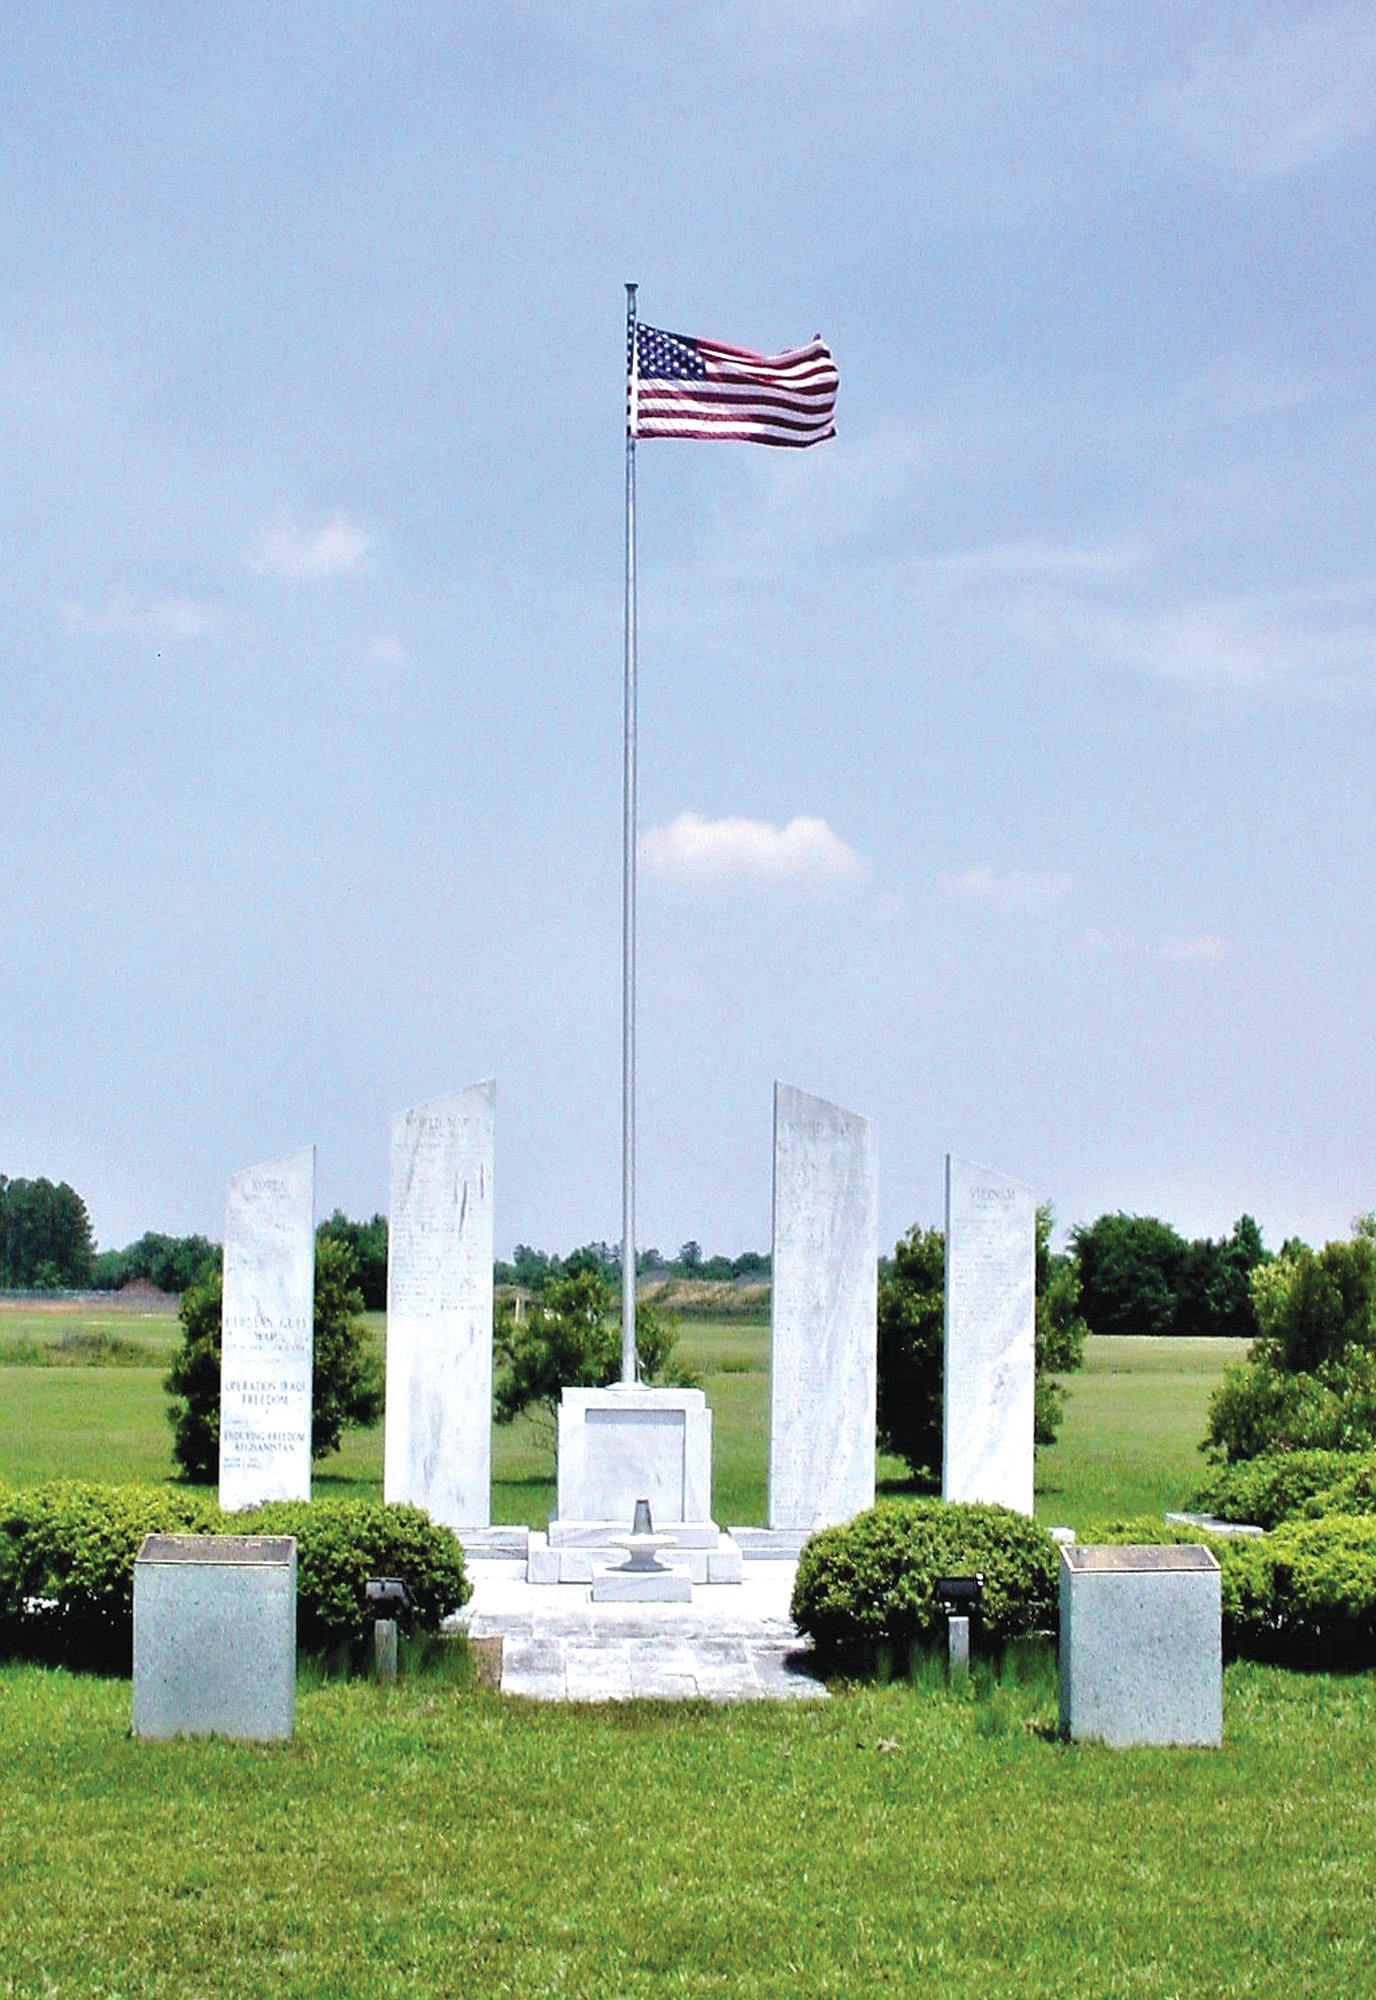 Mabry Memorial, named for Gen. George Mabry, in Sumter honors military members who have given their lives in service.